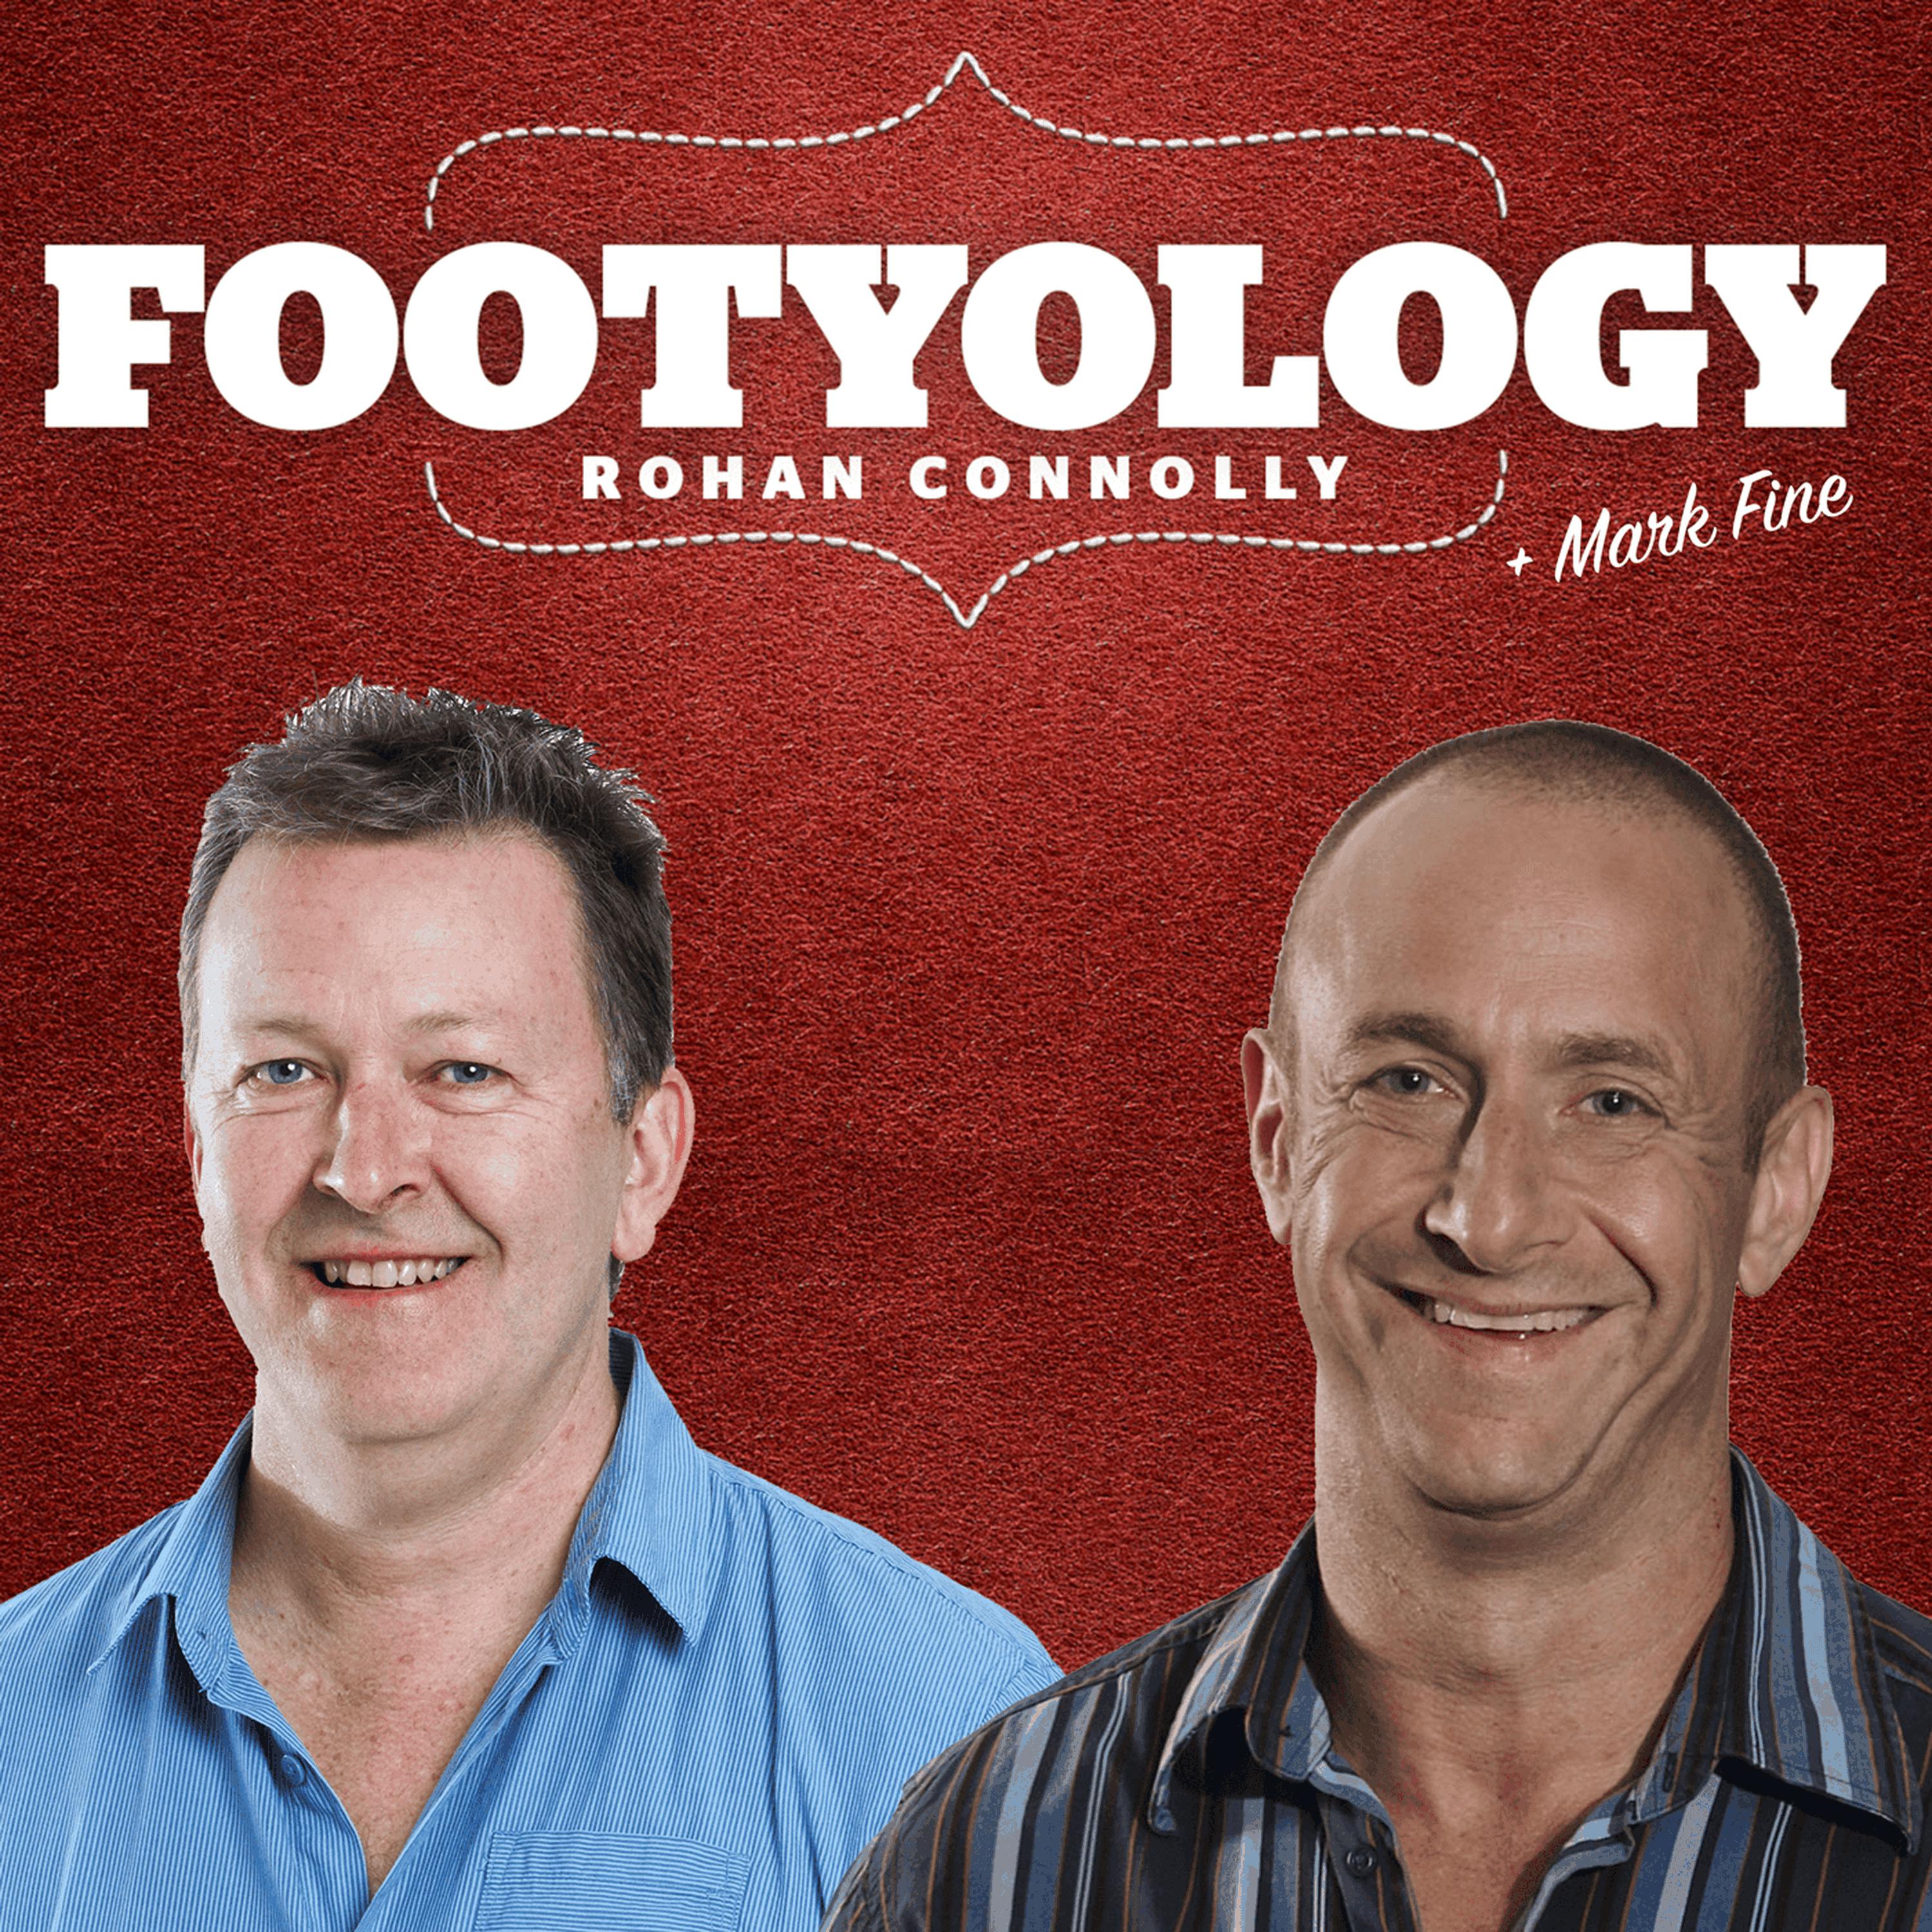 Footyology TV - Round 19: Finals are coming early this year